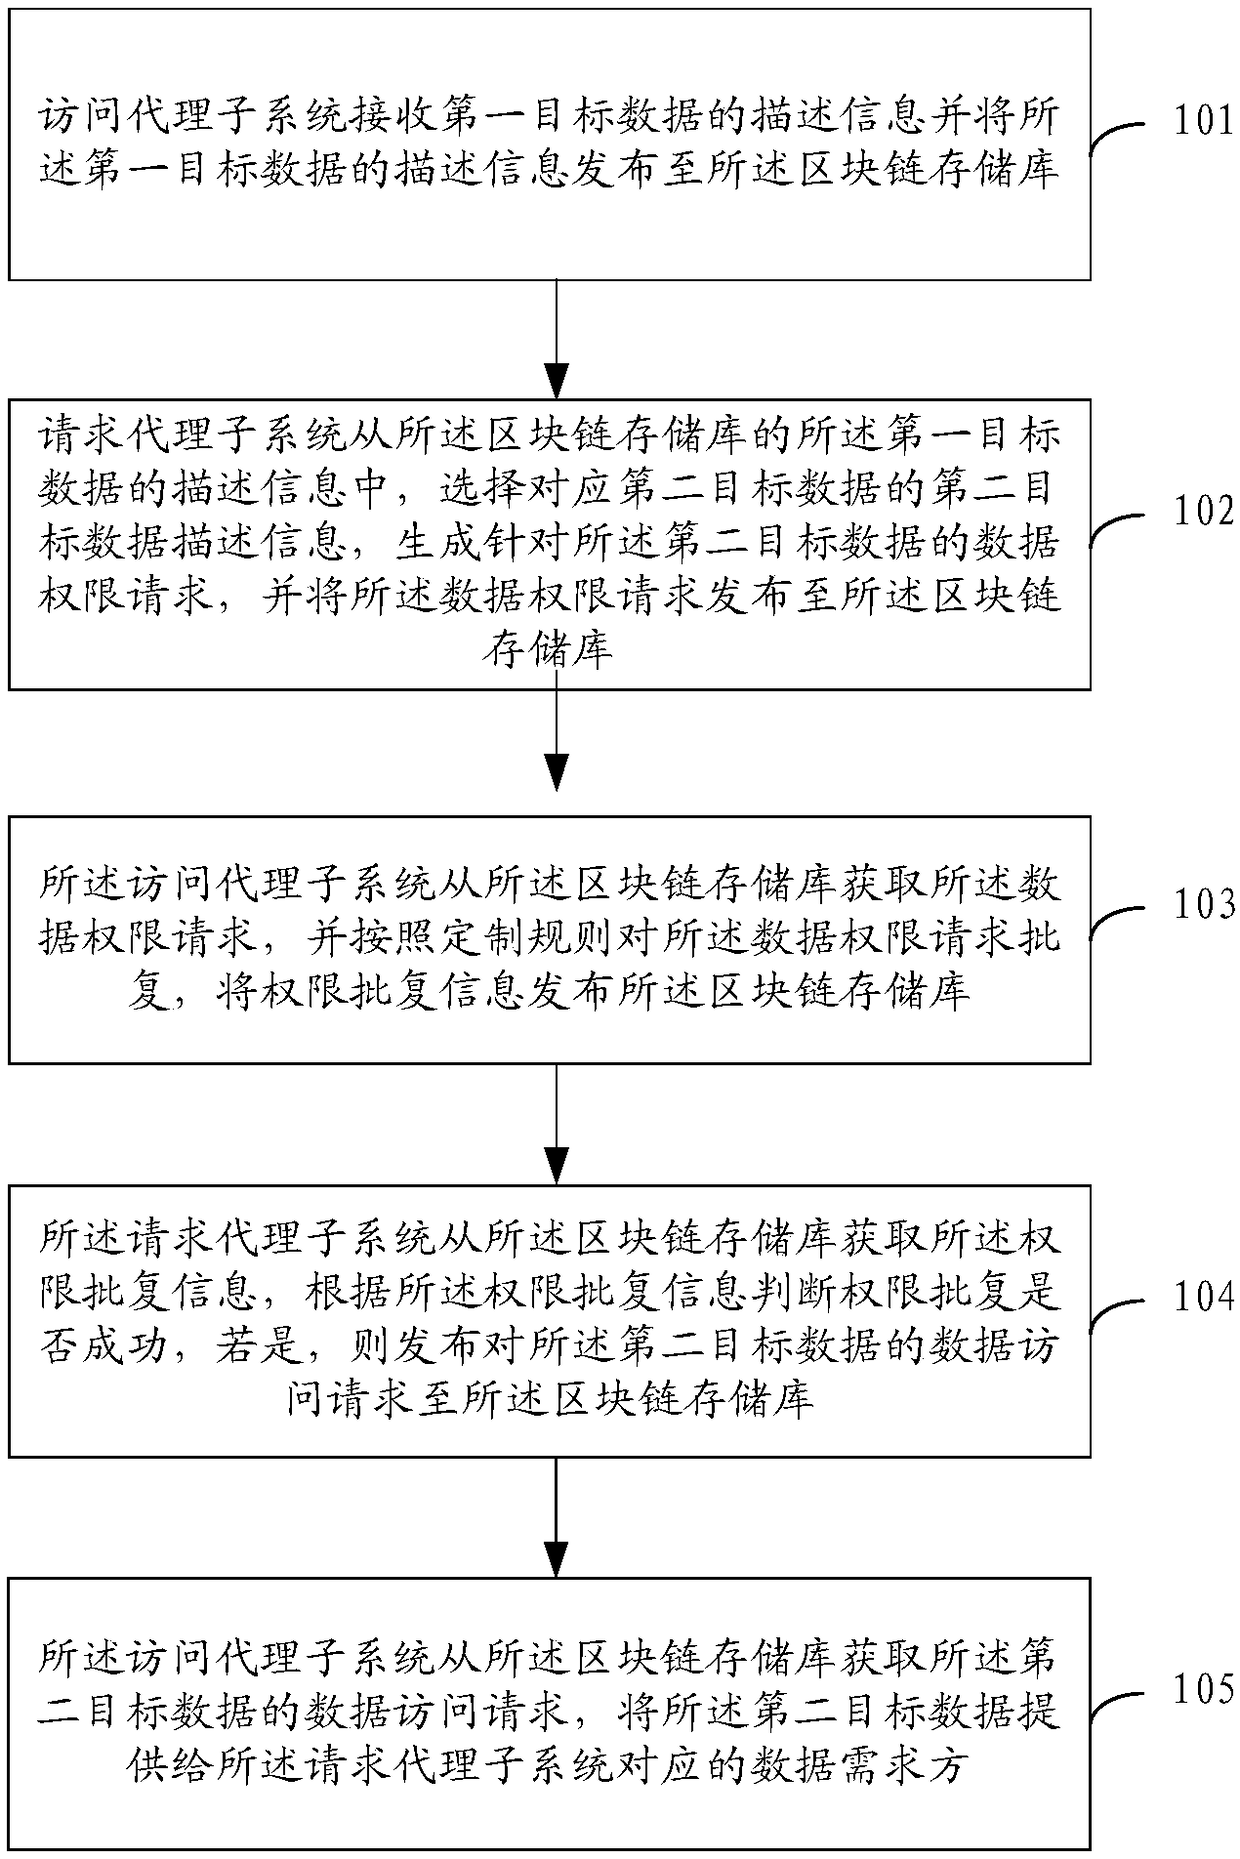 A data security sharing exchange method and data security sharing exchange platform system